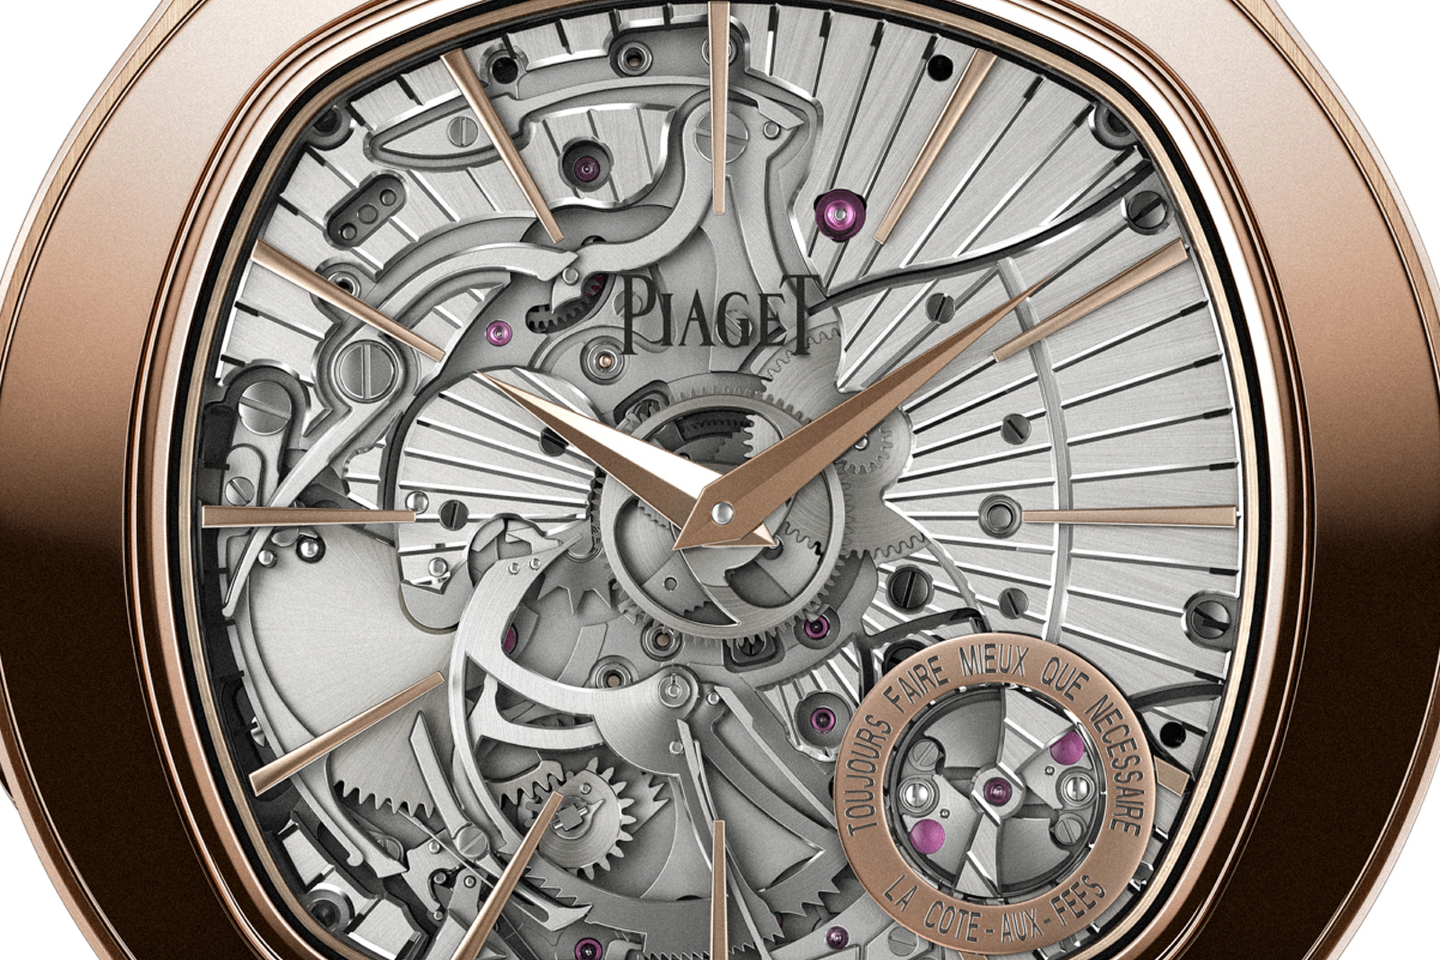 Pre-SIHH 2013: Piaget Emperador Coussin Ultra-Thin Minute Repeater